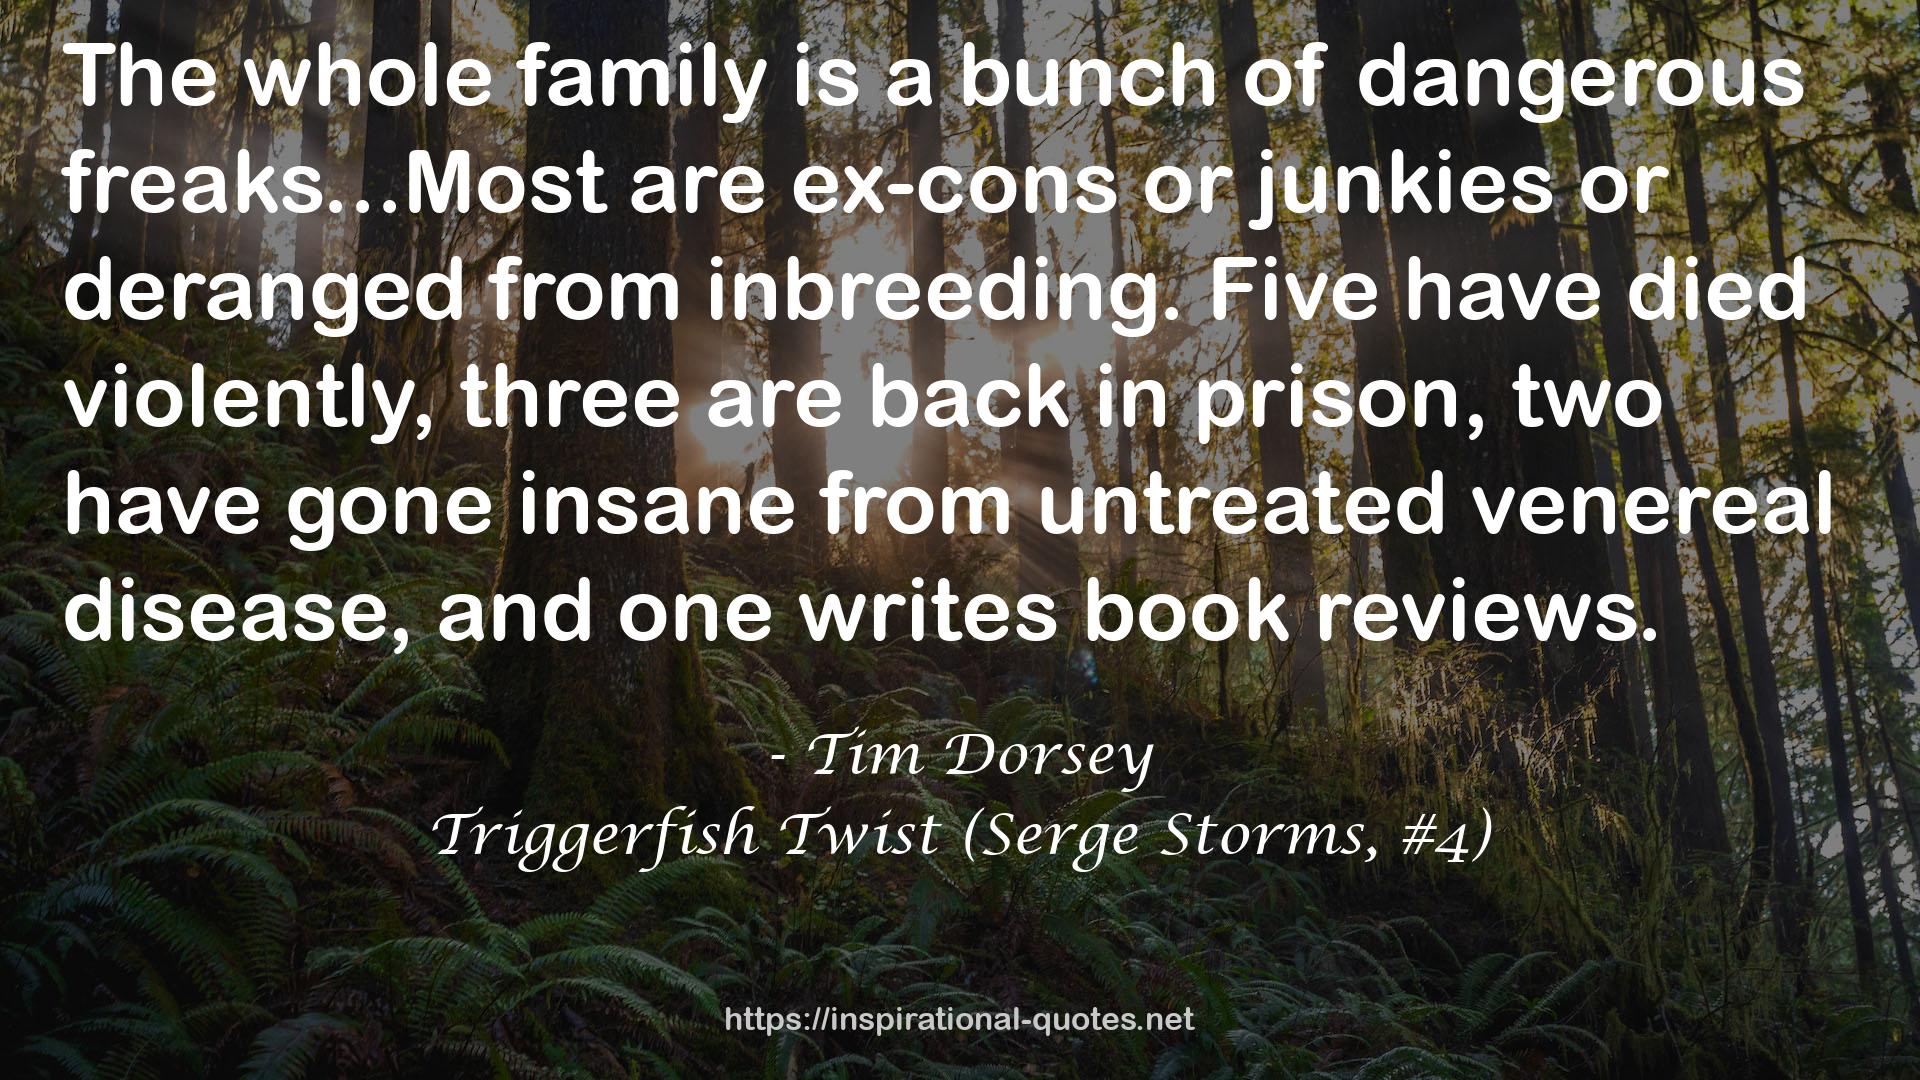 Triggerfish Twist (Serge Storms, #4) QUOTES